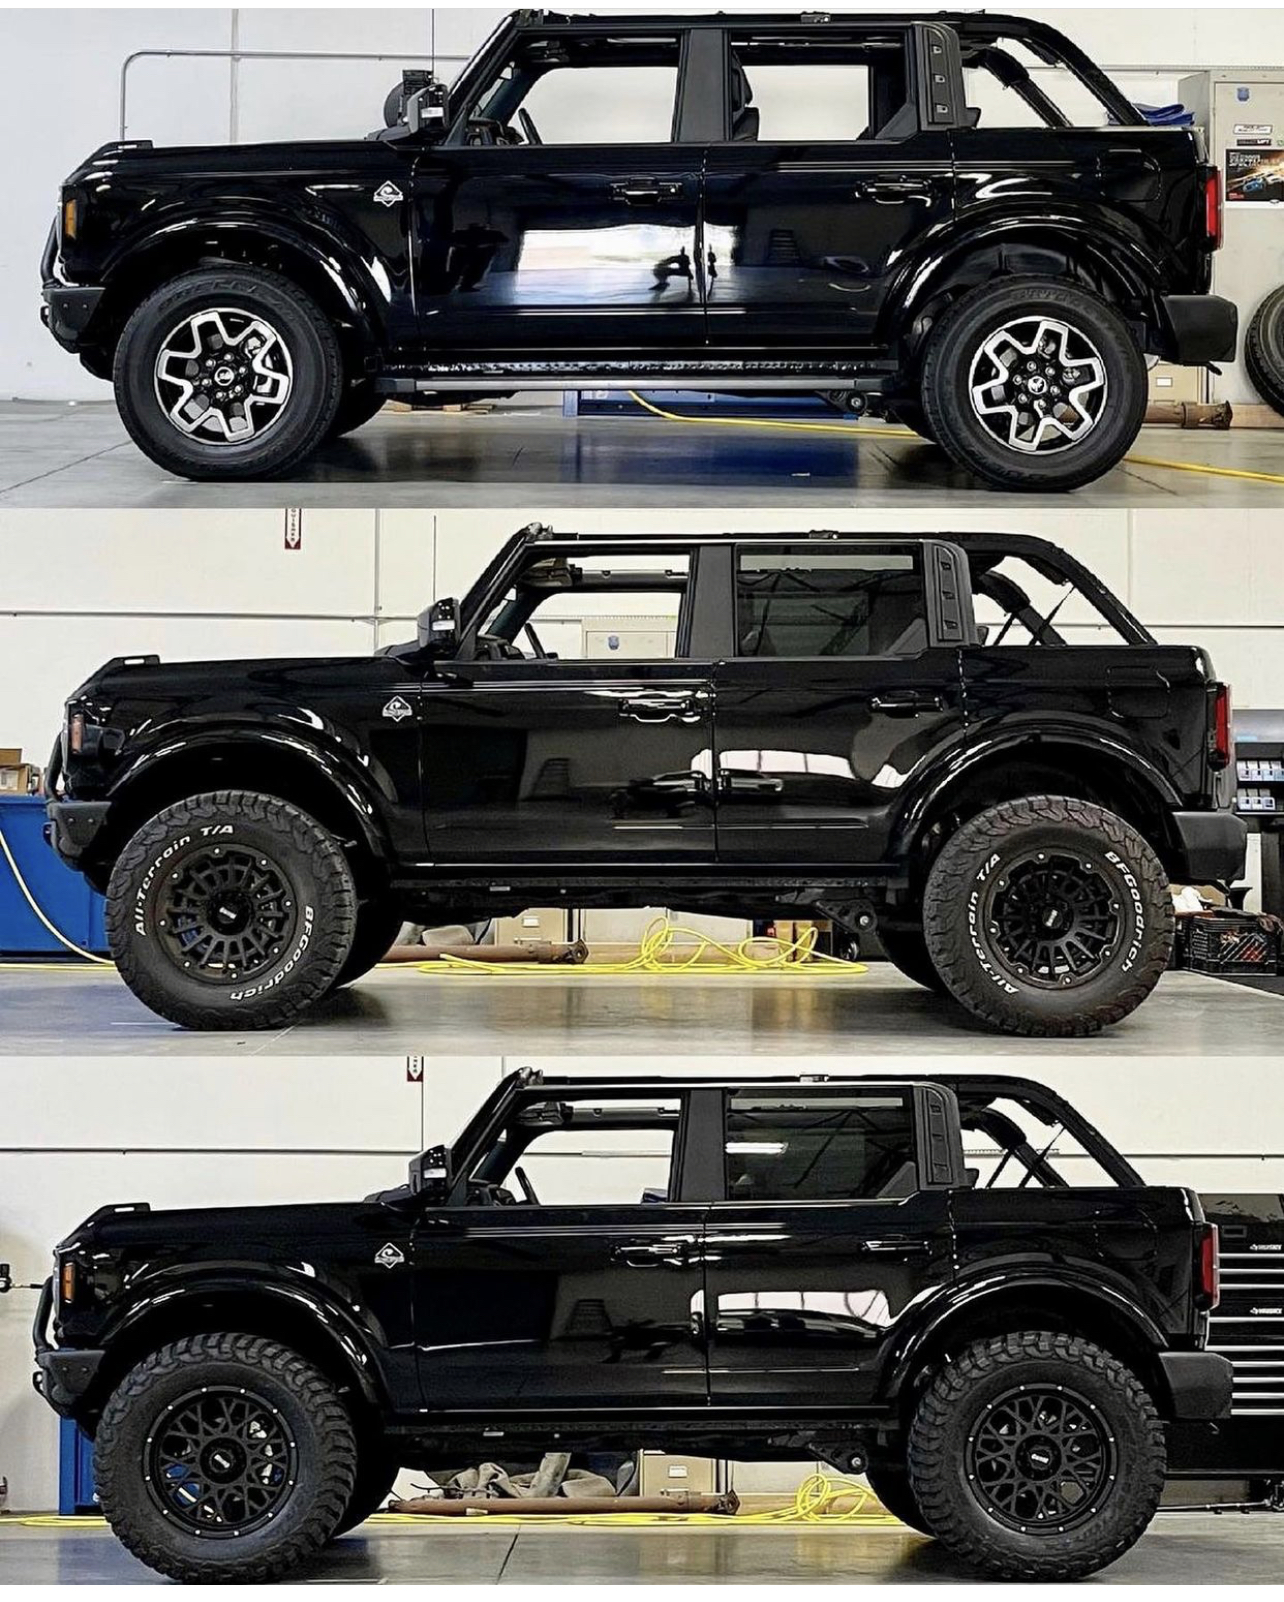 Ford Bronco 32’s vs 35’s vs 37’s mounted on Bronco Outer Banks with 4" lift 378A6FCA-46B7-4511-BD61-33C640B6DC77